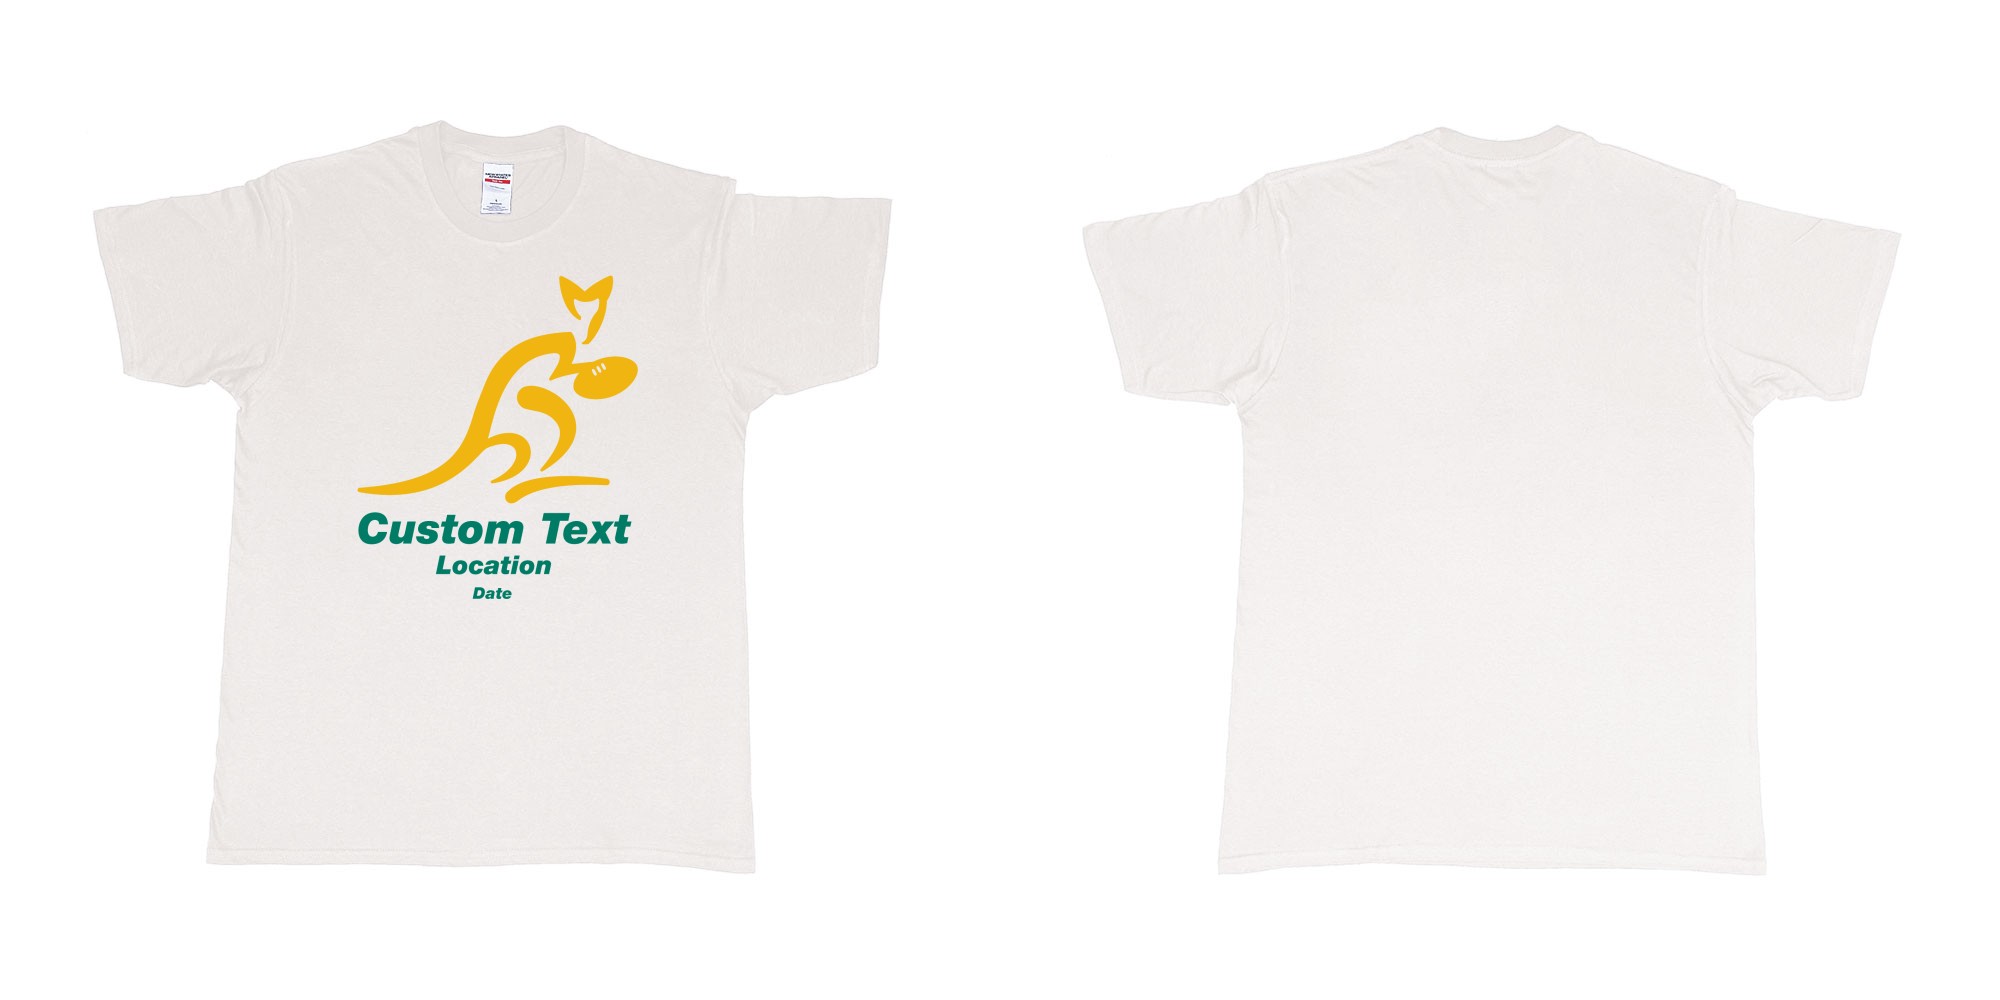 Custom tshirt design australia national rugby union team the wallabies in fabric color white choice your own text made in Bali by The Pirate Way